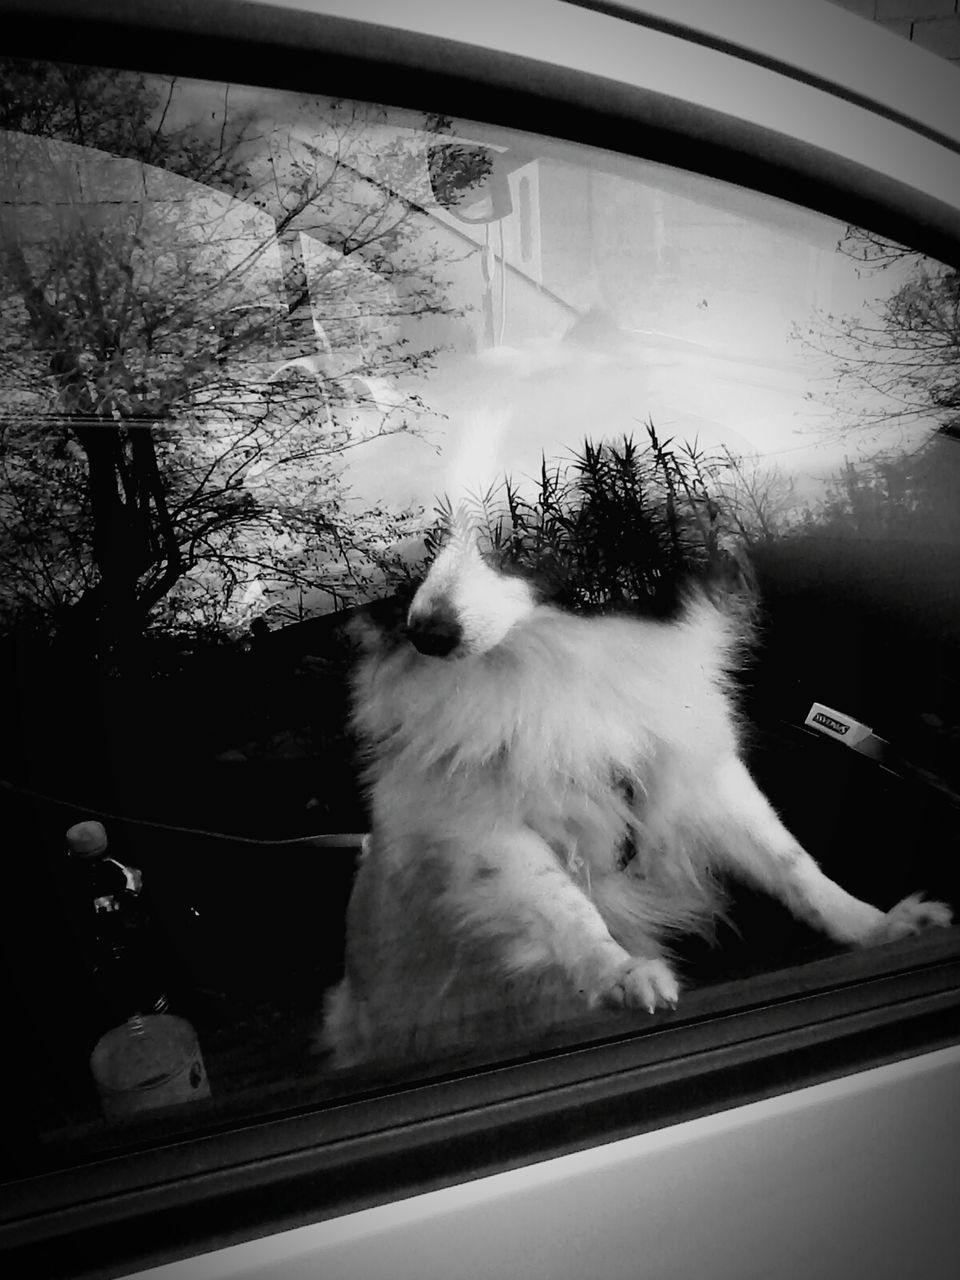 animal themes, one animal, pets, indoors, glass - material, domestic animals, window, transparent, mammal, looking through window, domestic cat, cat, transportation, close-up, car, reflection, no people, mode of transport, vehicle interior, window sill